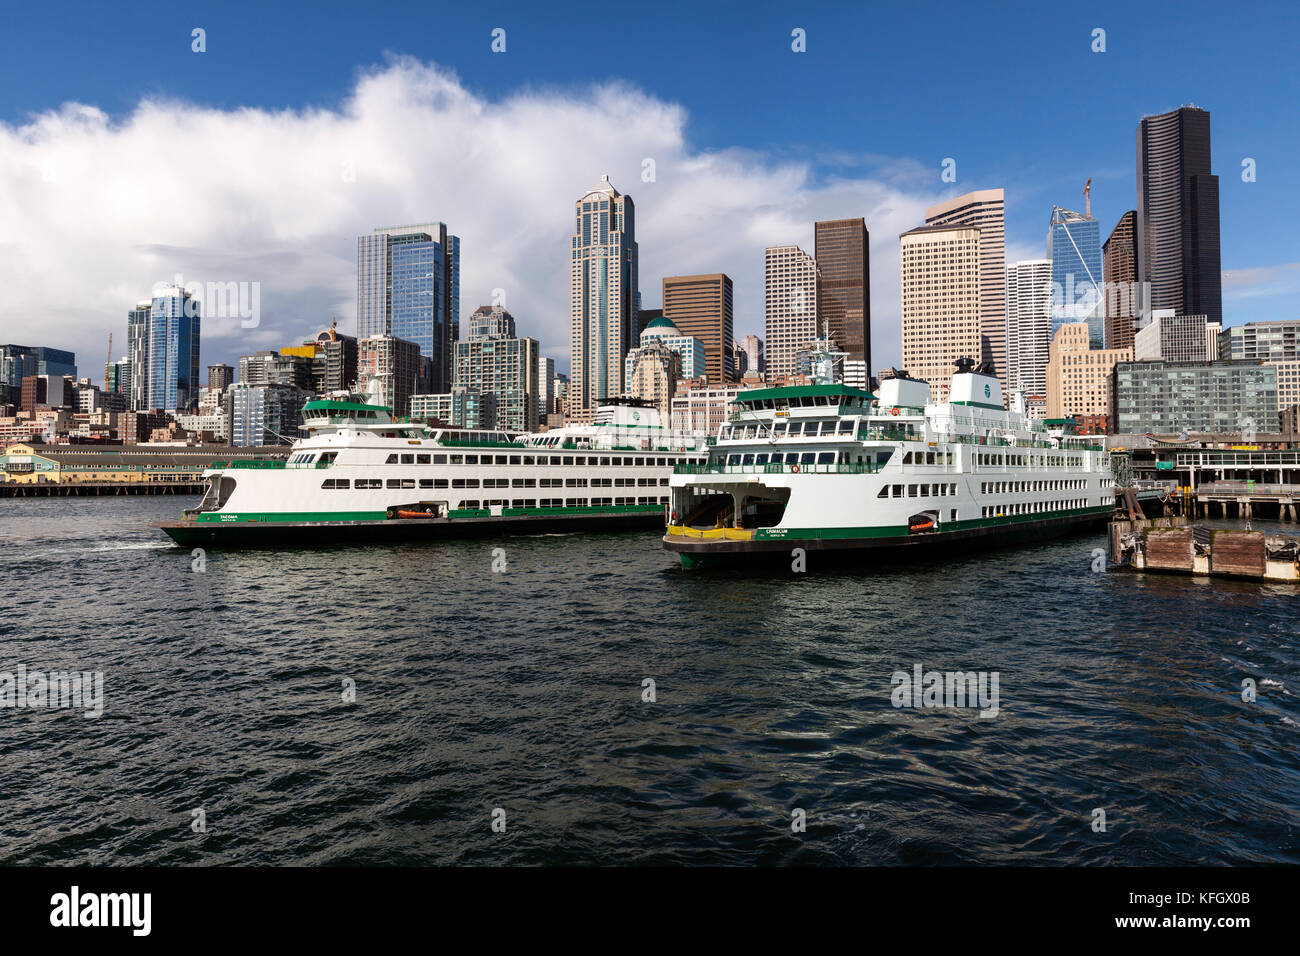 WA14048-00...WASHINGTON - Ferry boats and down town Seattleviewed from the deck of the Seattle to Bremerton Ferry. Stock Photo